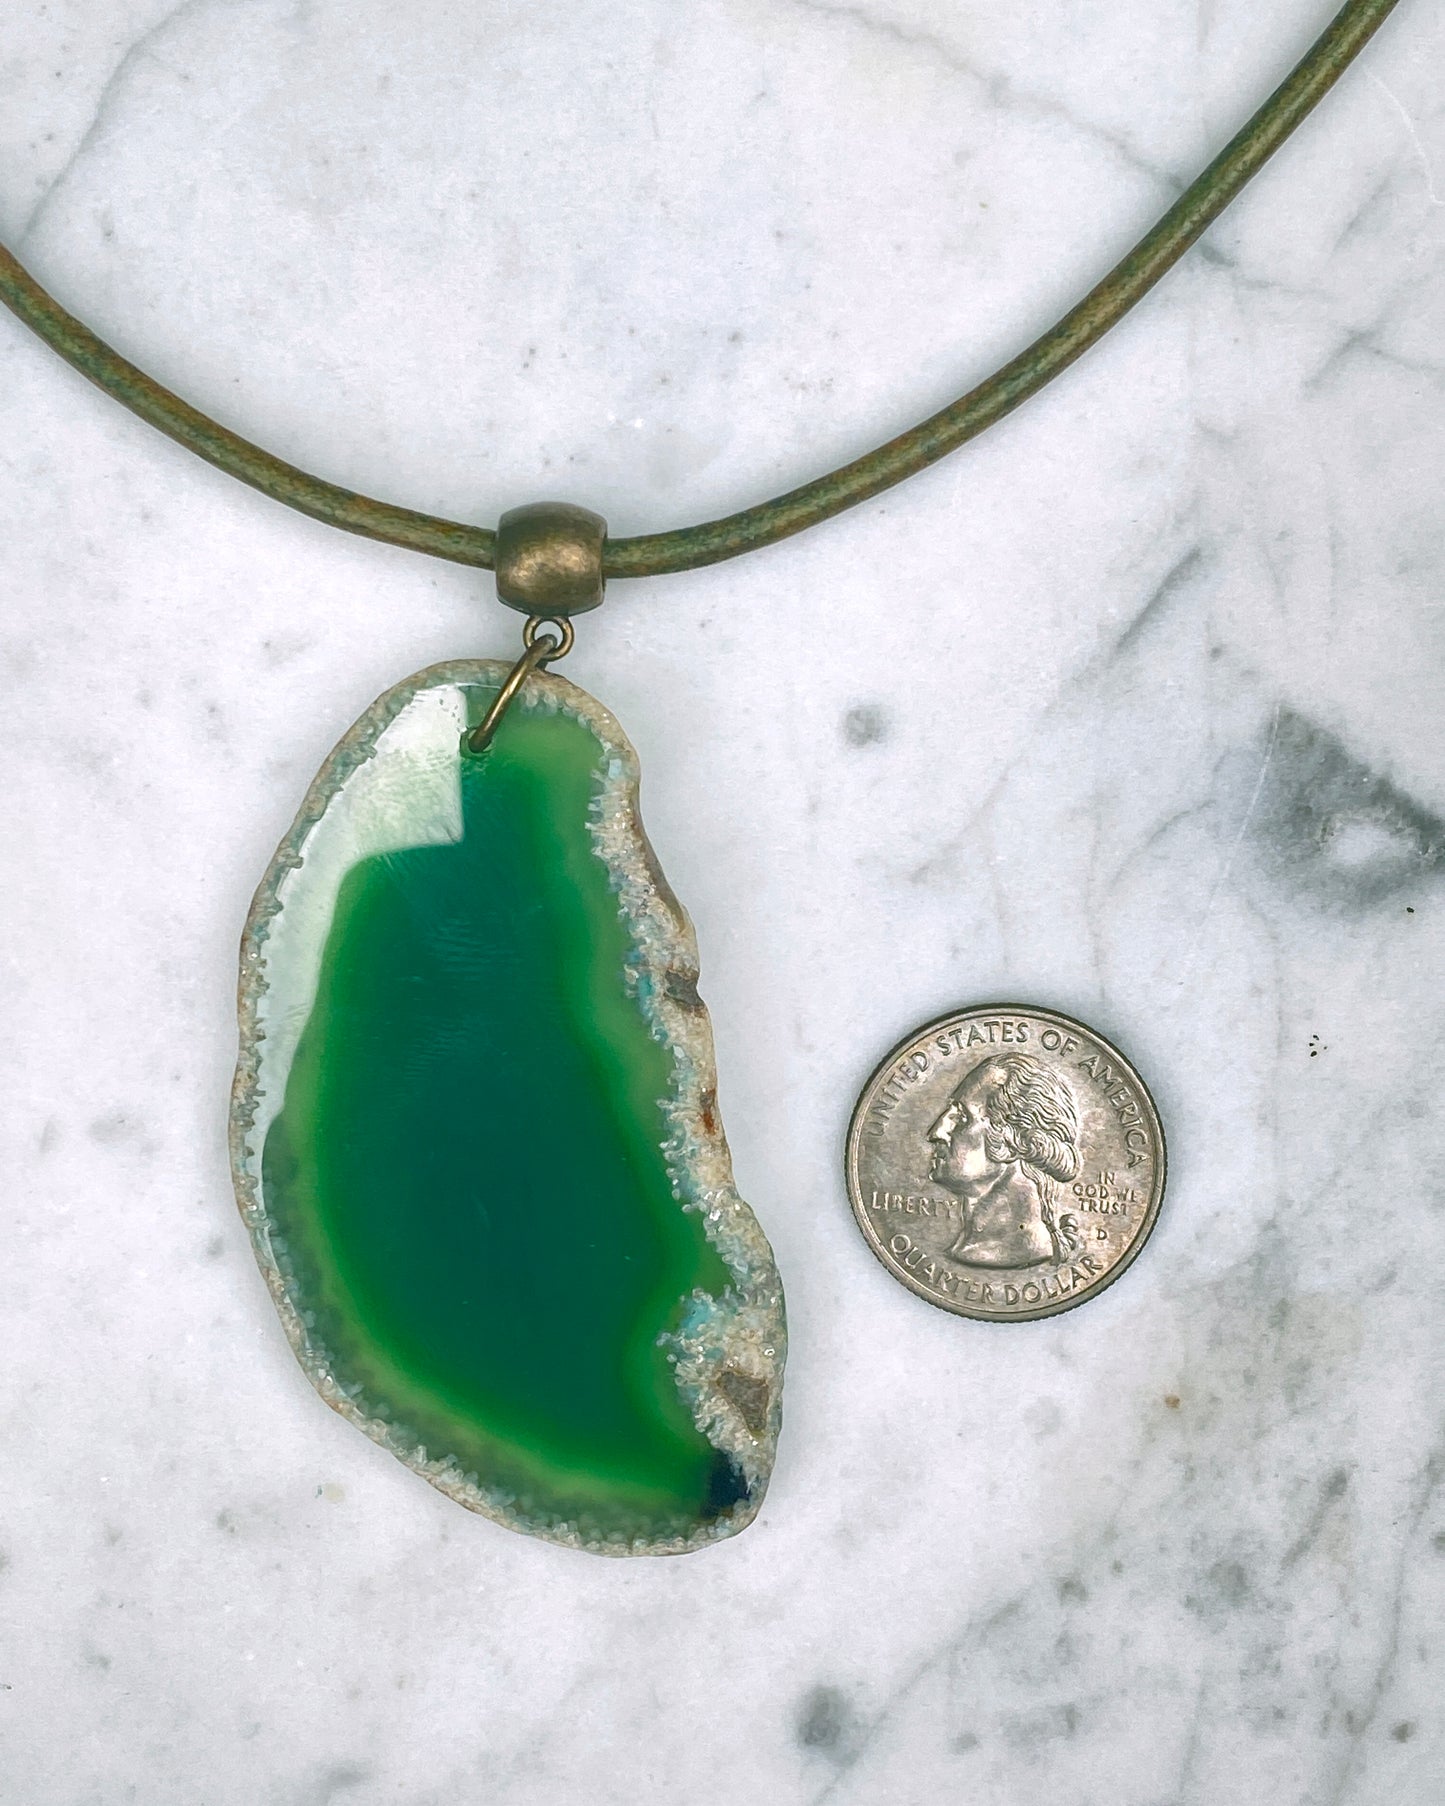 Green Agate Slice necklace